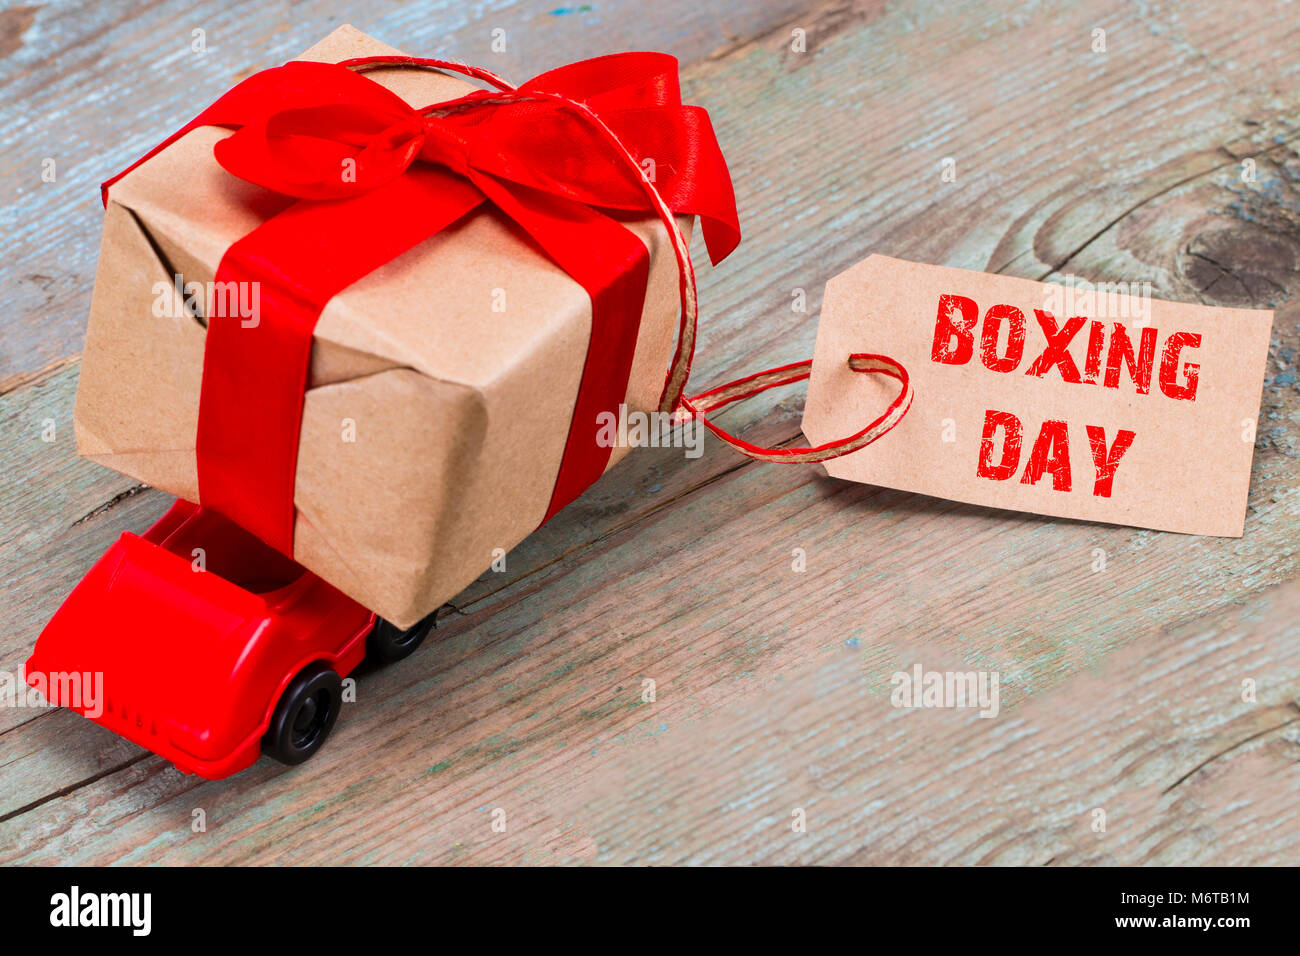 The BOXING DAY concept. Red toy car delivering gifts box with tag with  text: BOXING DAY on wooden background Stock Photo - Alamy